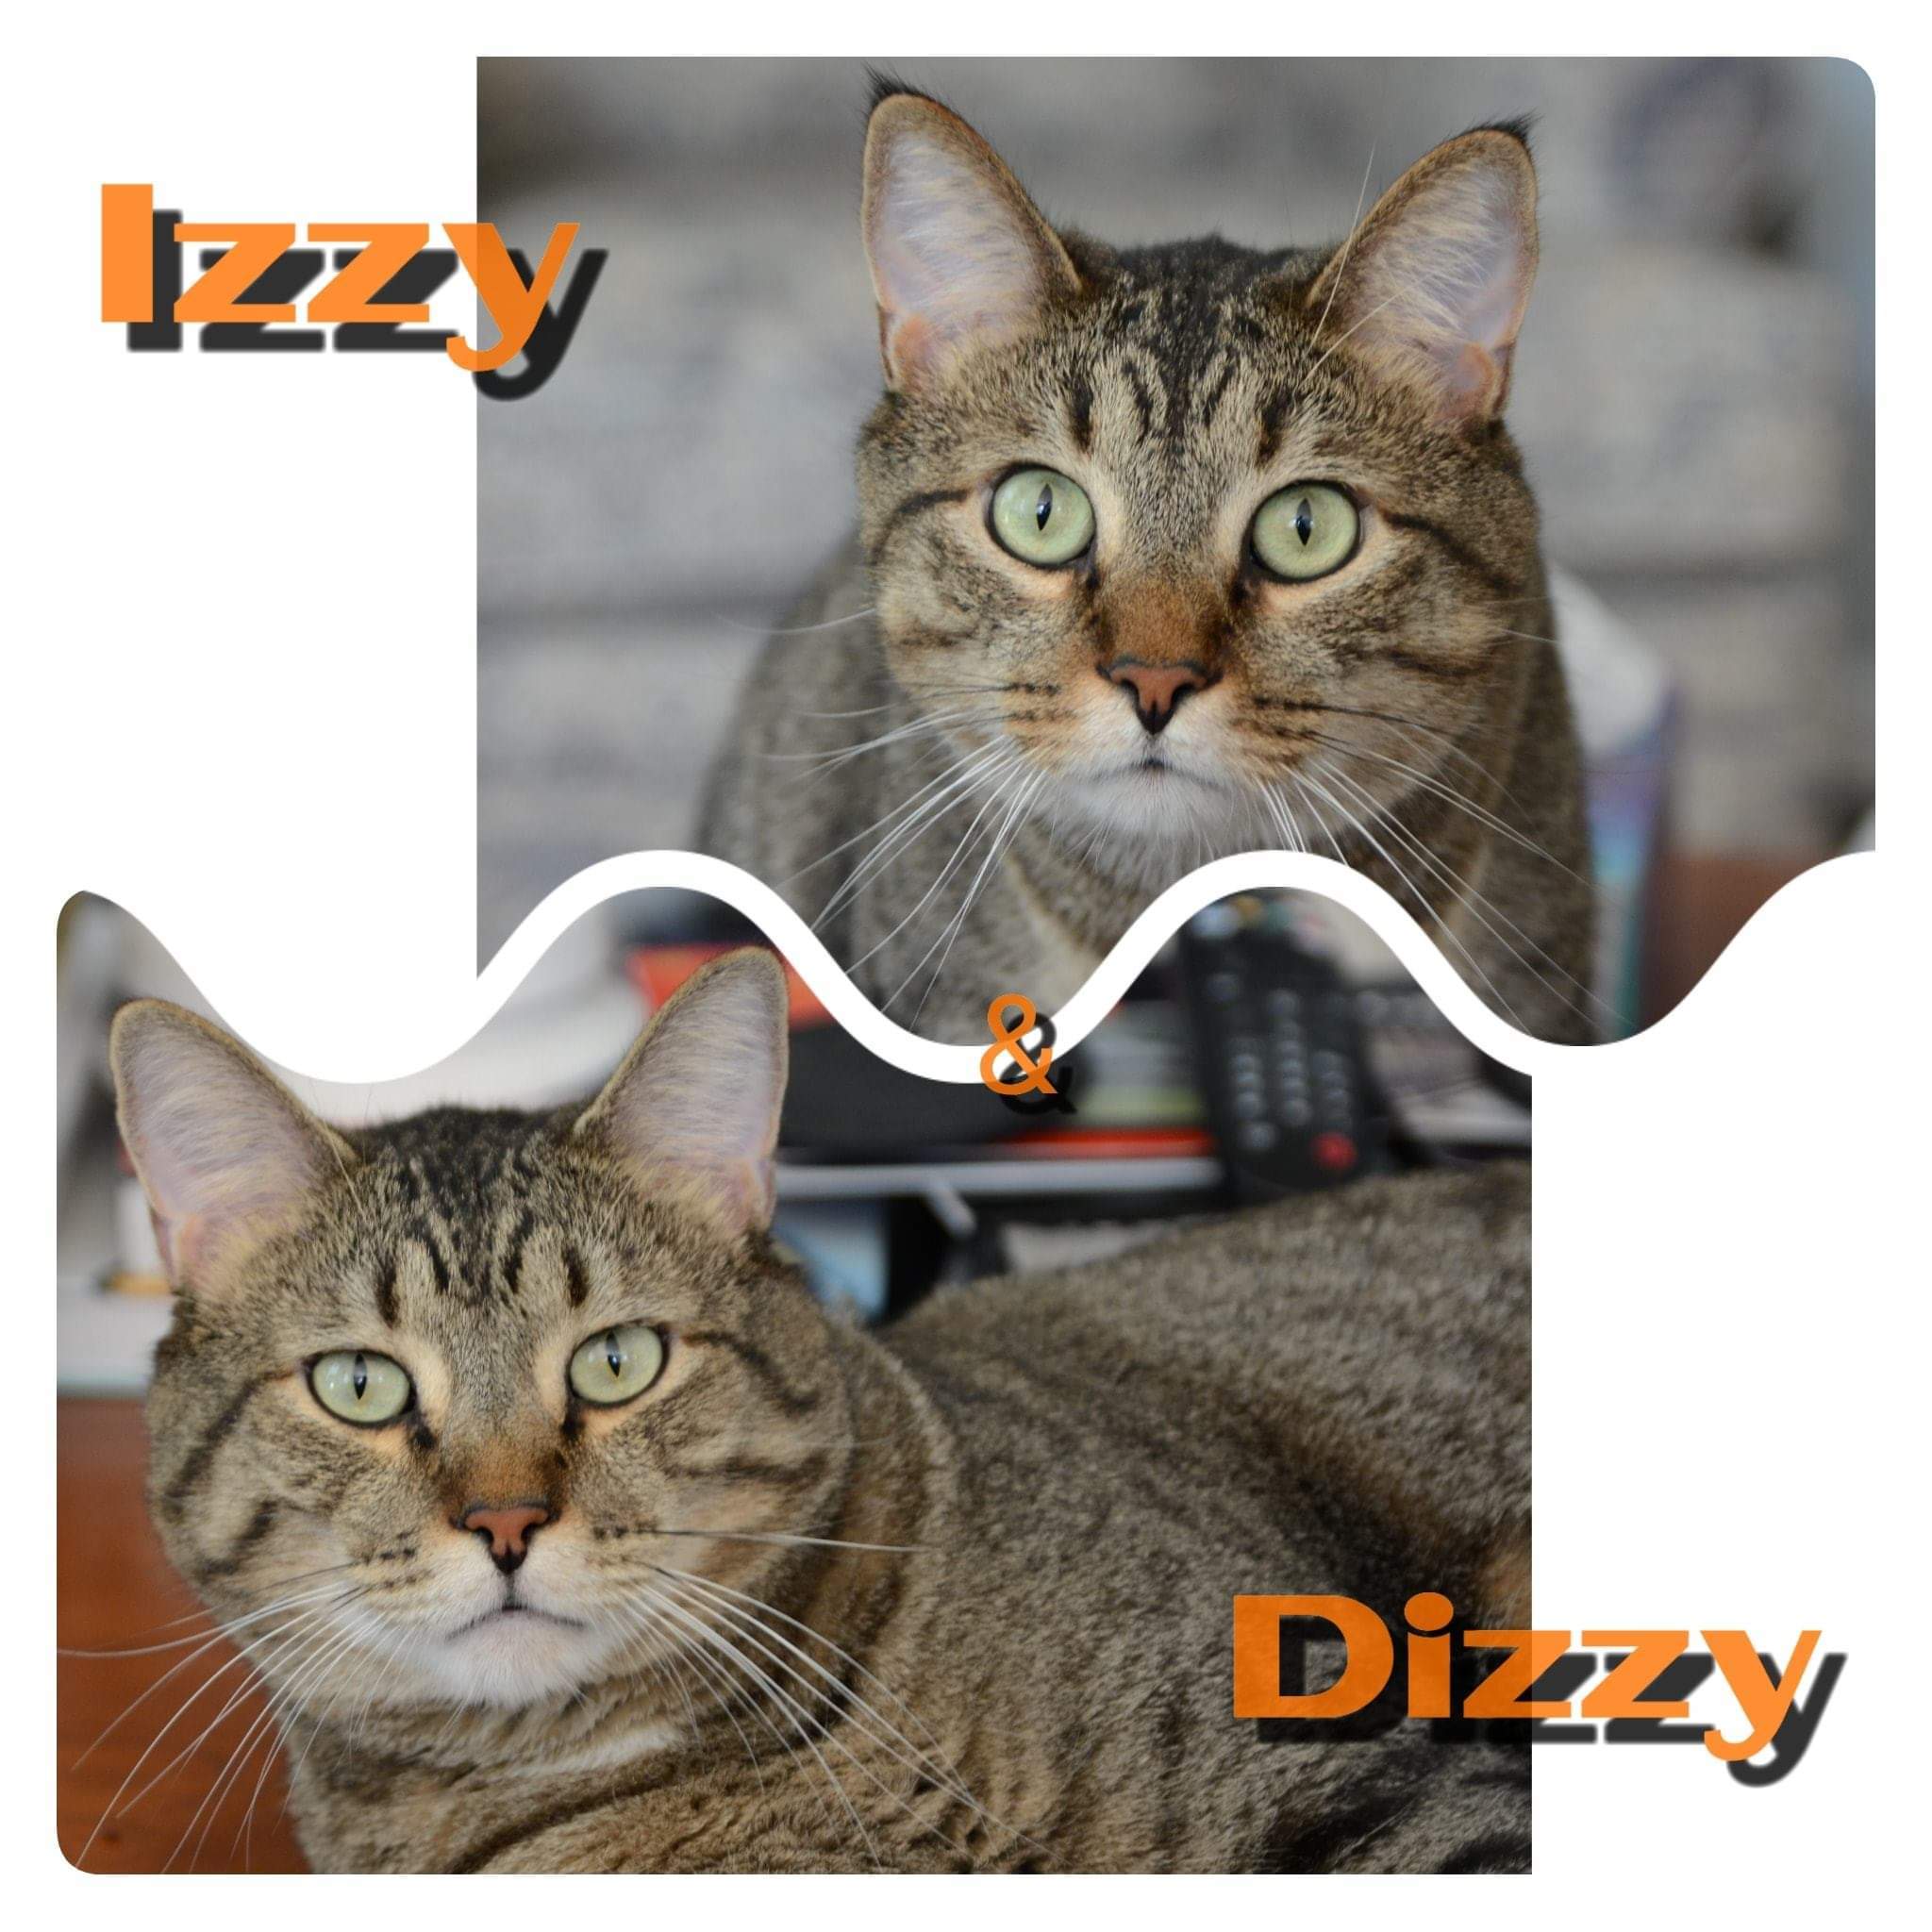 Izzy detail page